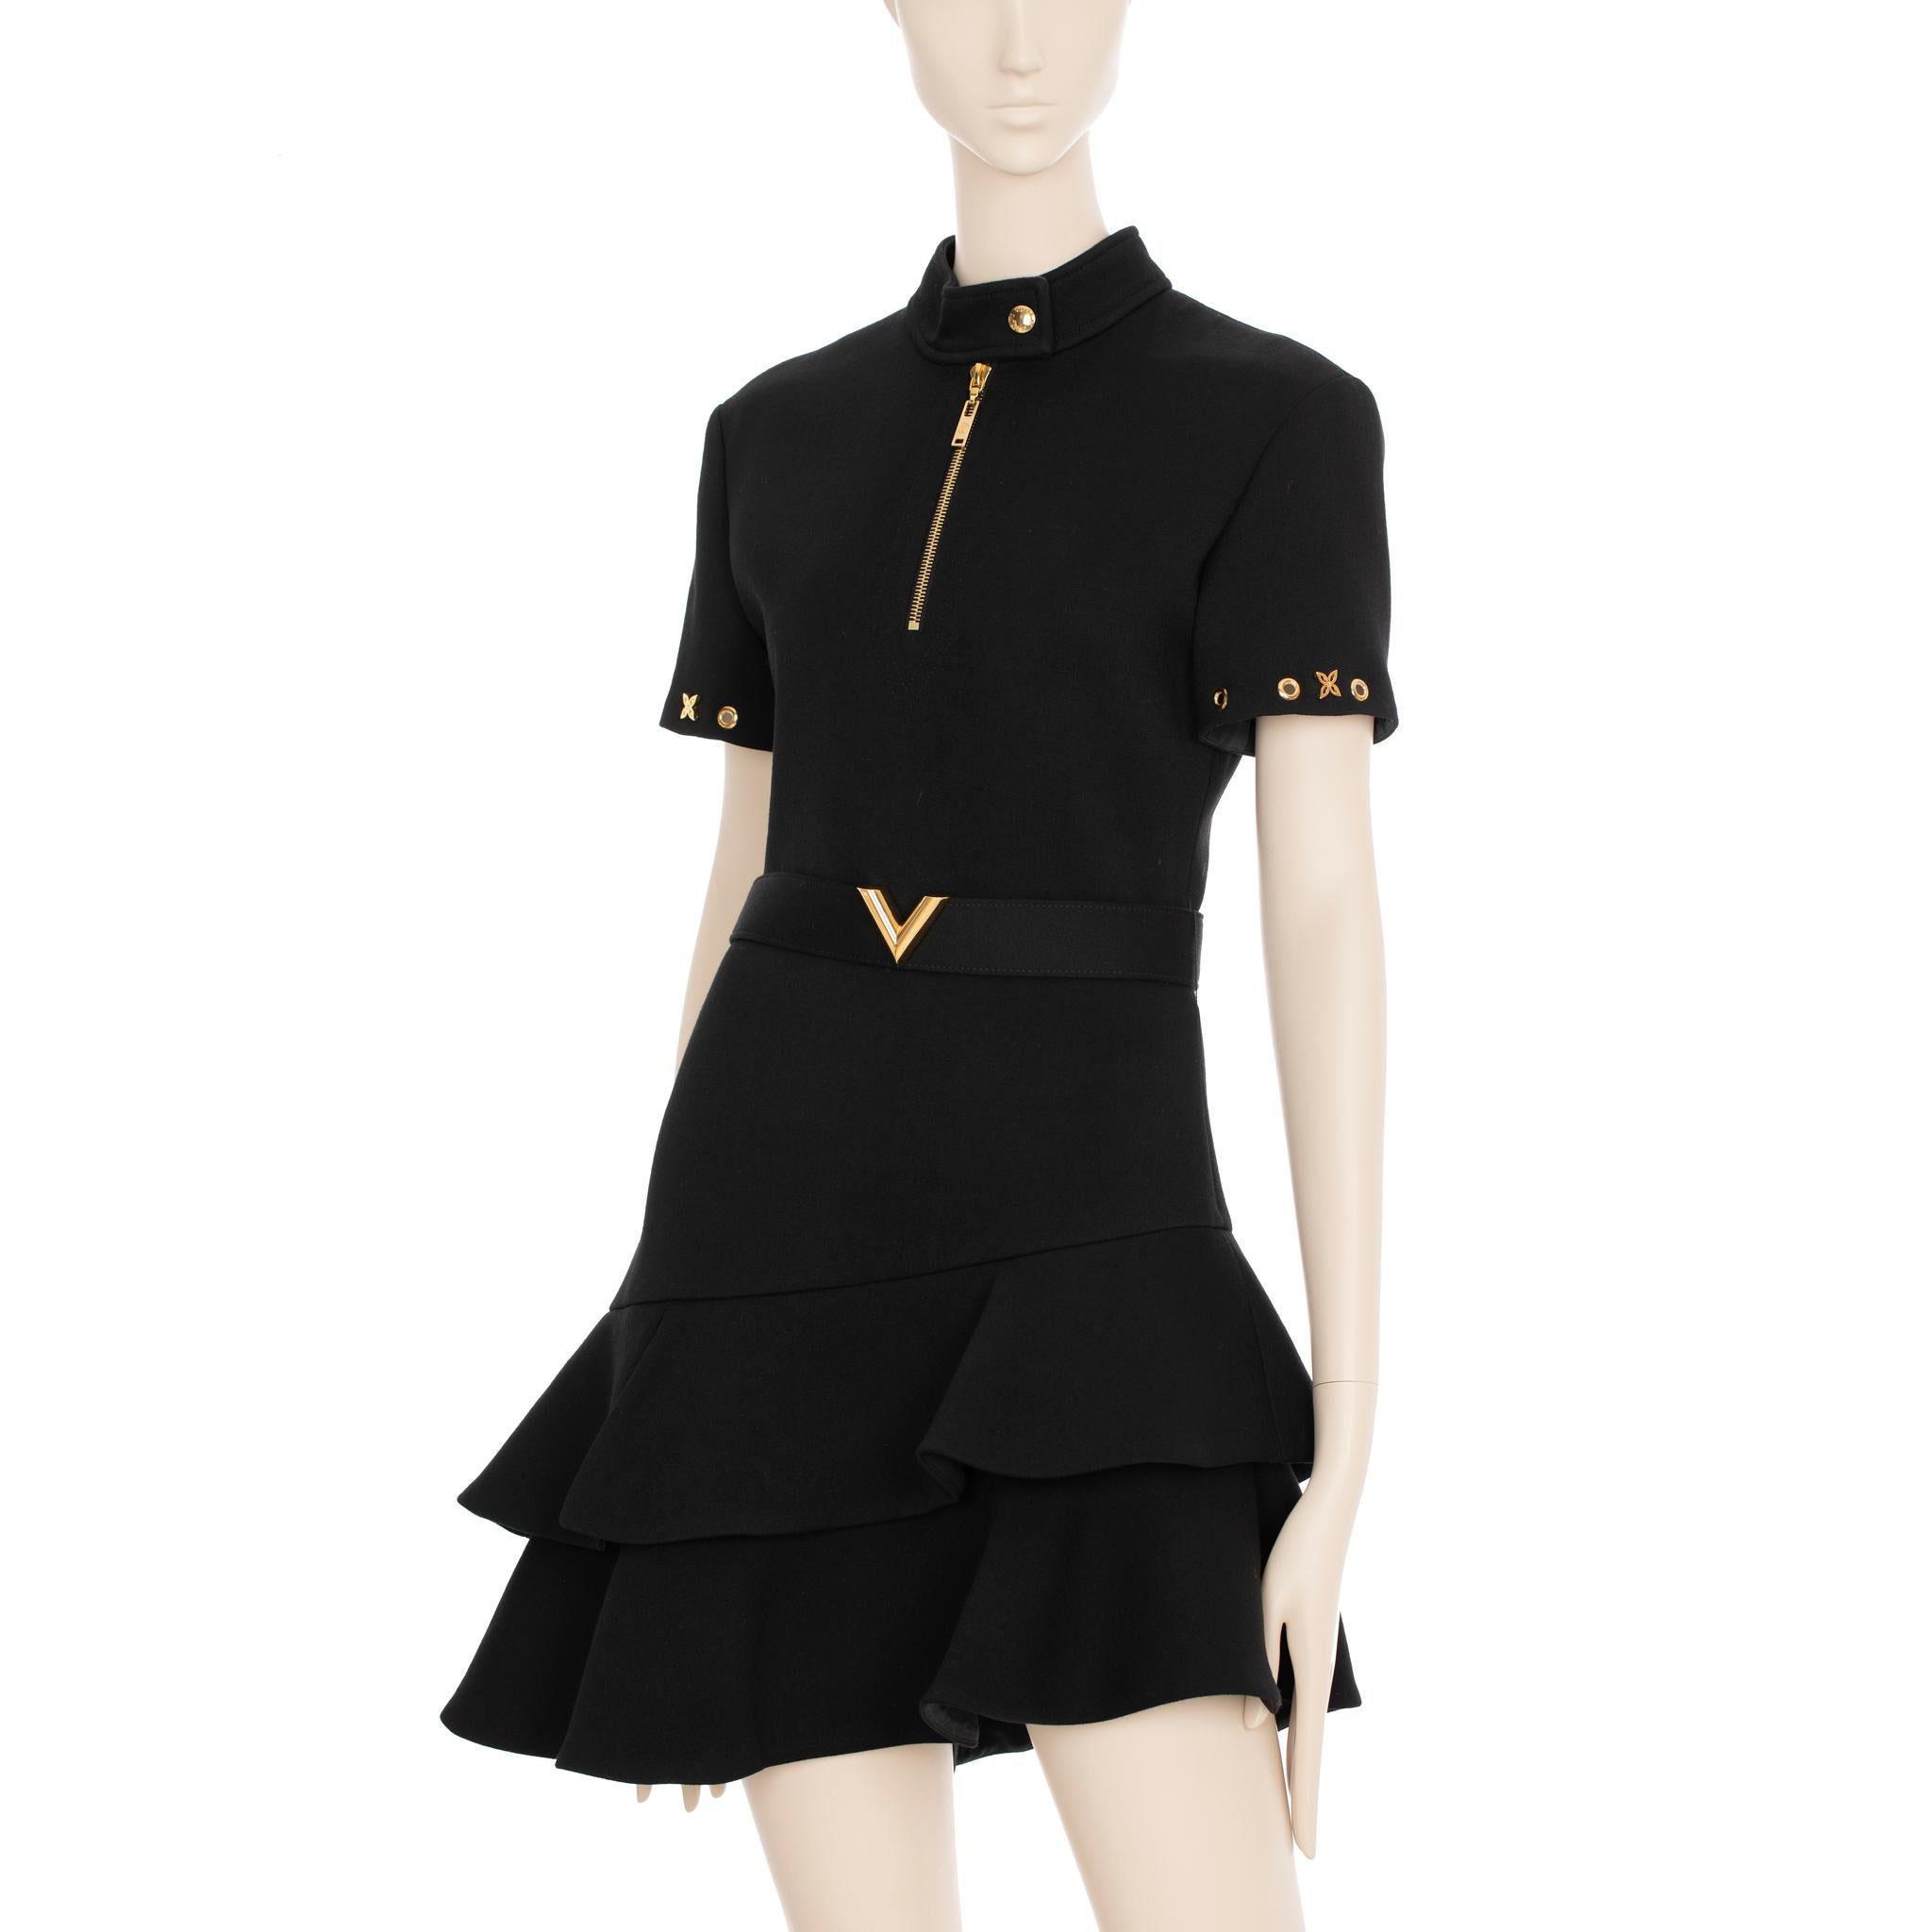 Louis Vuitton Black Dress With Peplum Skirt 36 FR In Excellent Condition For Sale In DOUBLE BAY, NSW